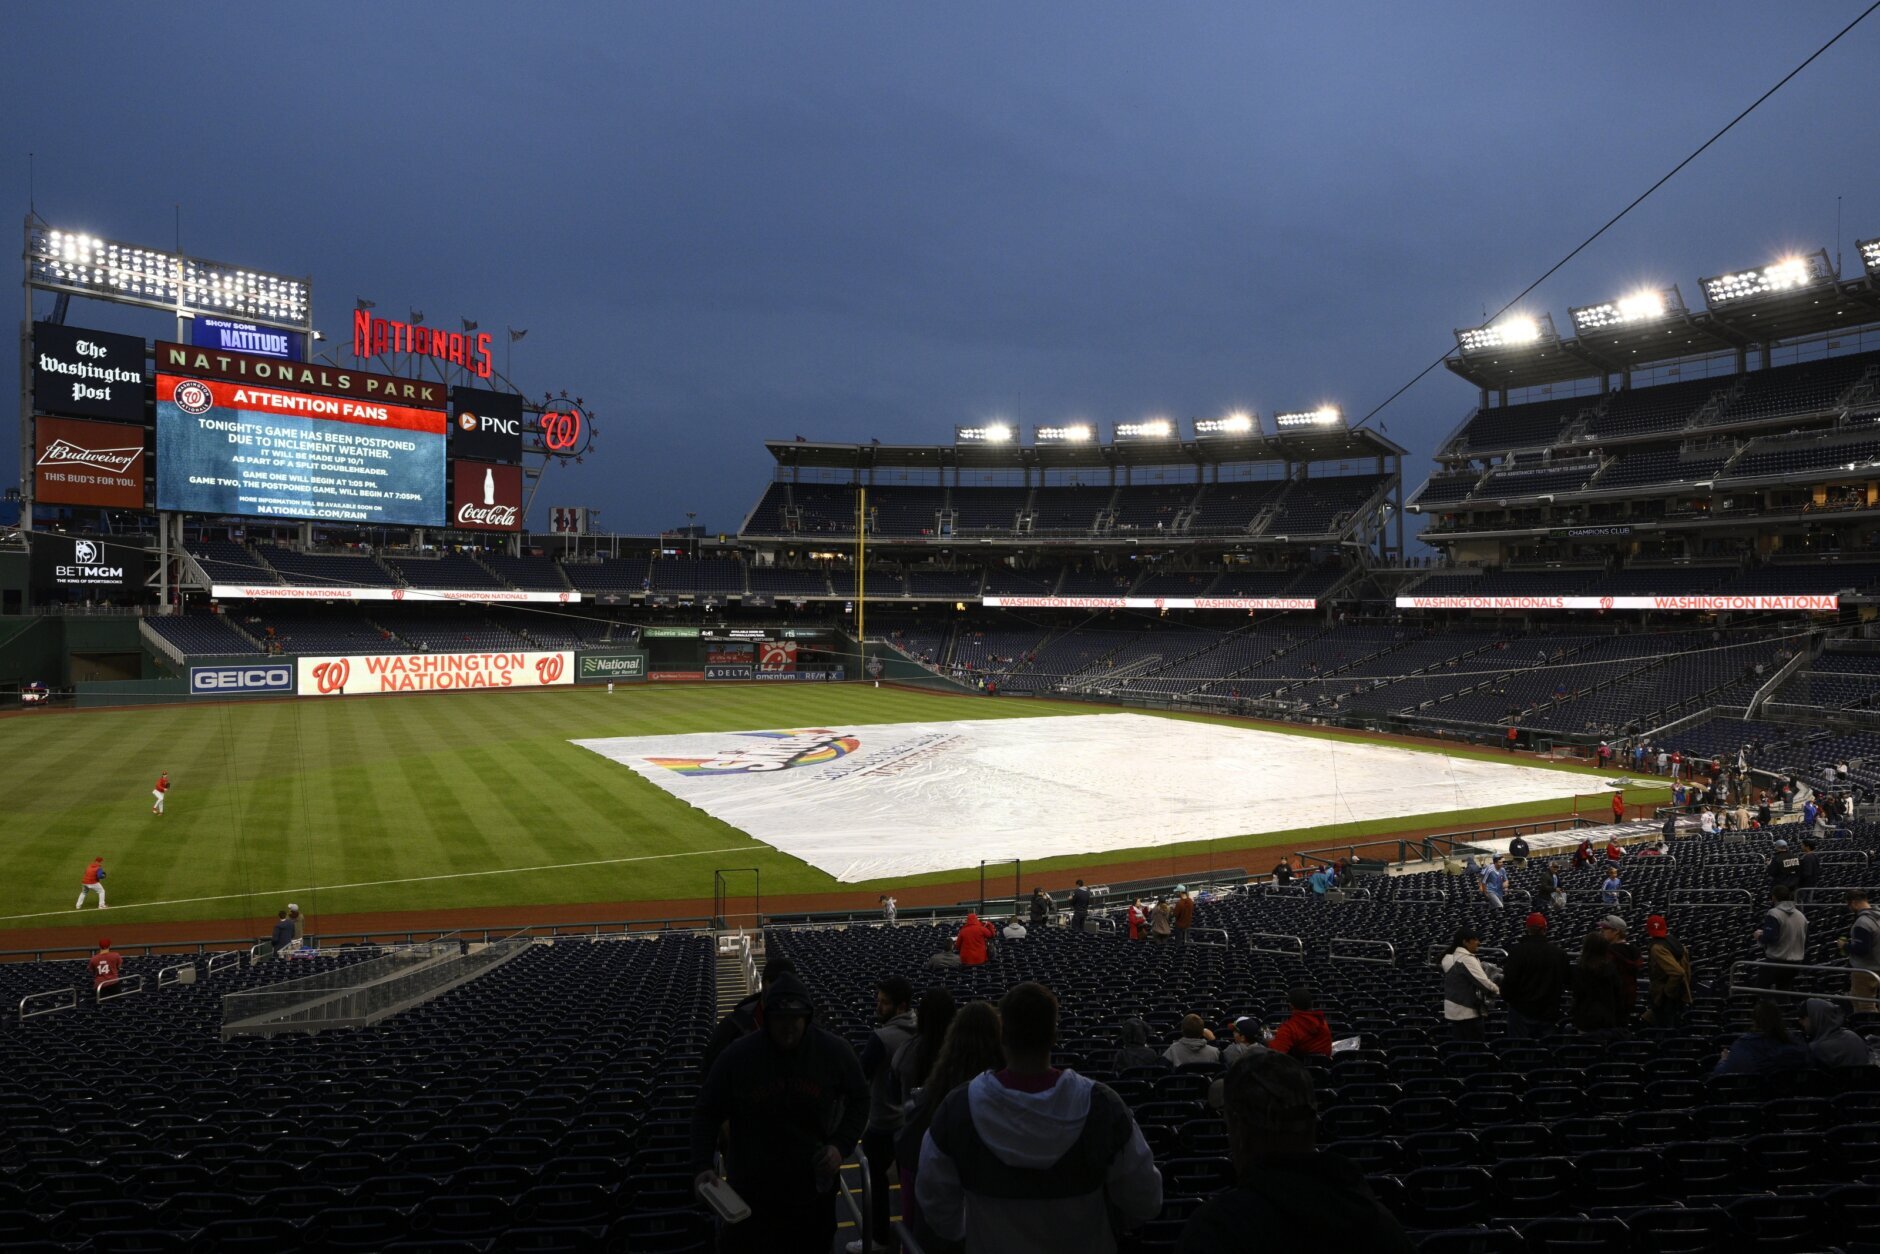 Washington Nationals at Philadelphia Phillies Gm1 odds and predictions